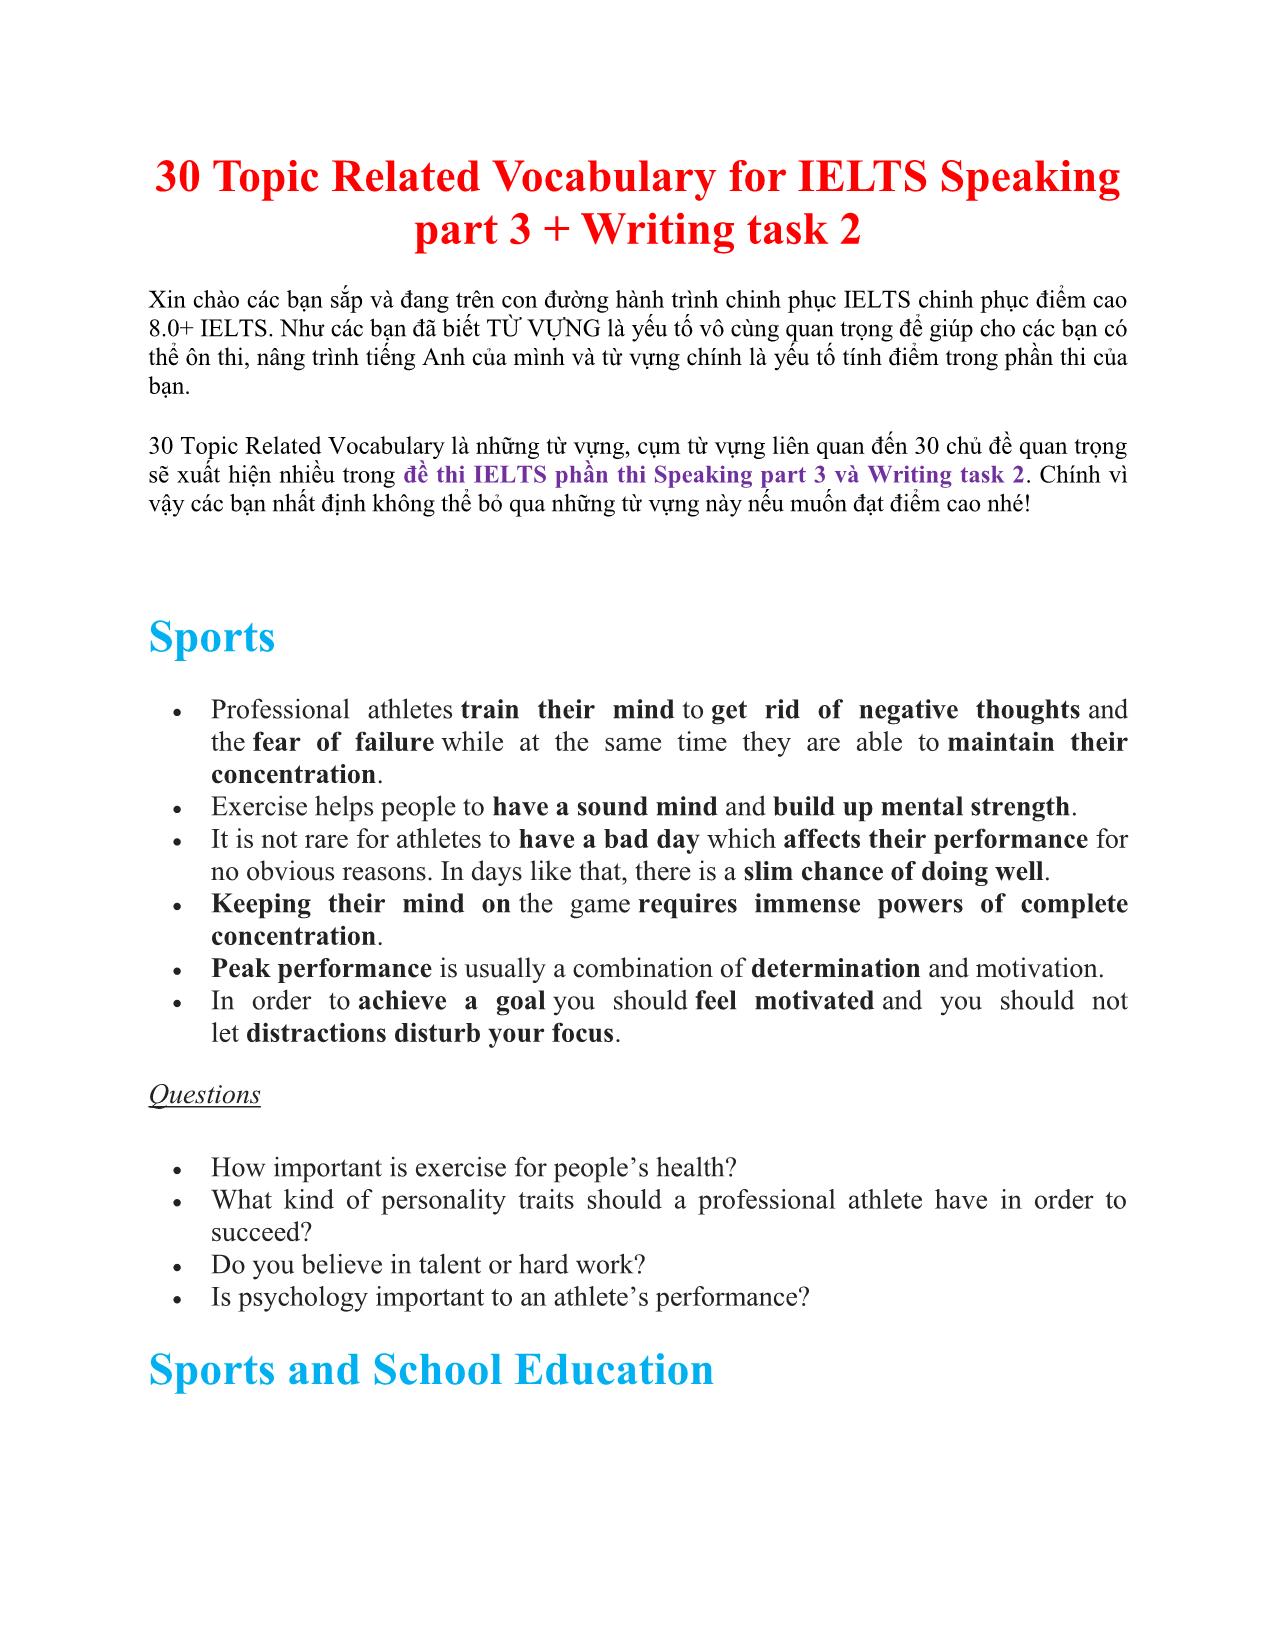 30 Topic Related Vocabulary for IELTS Speaking part 3 + Writing task 2 trang 1